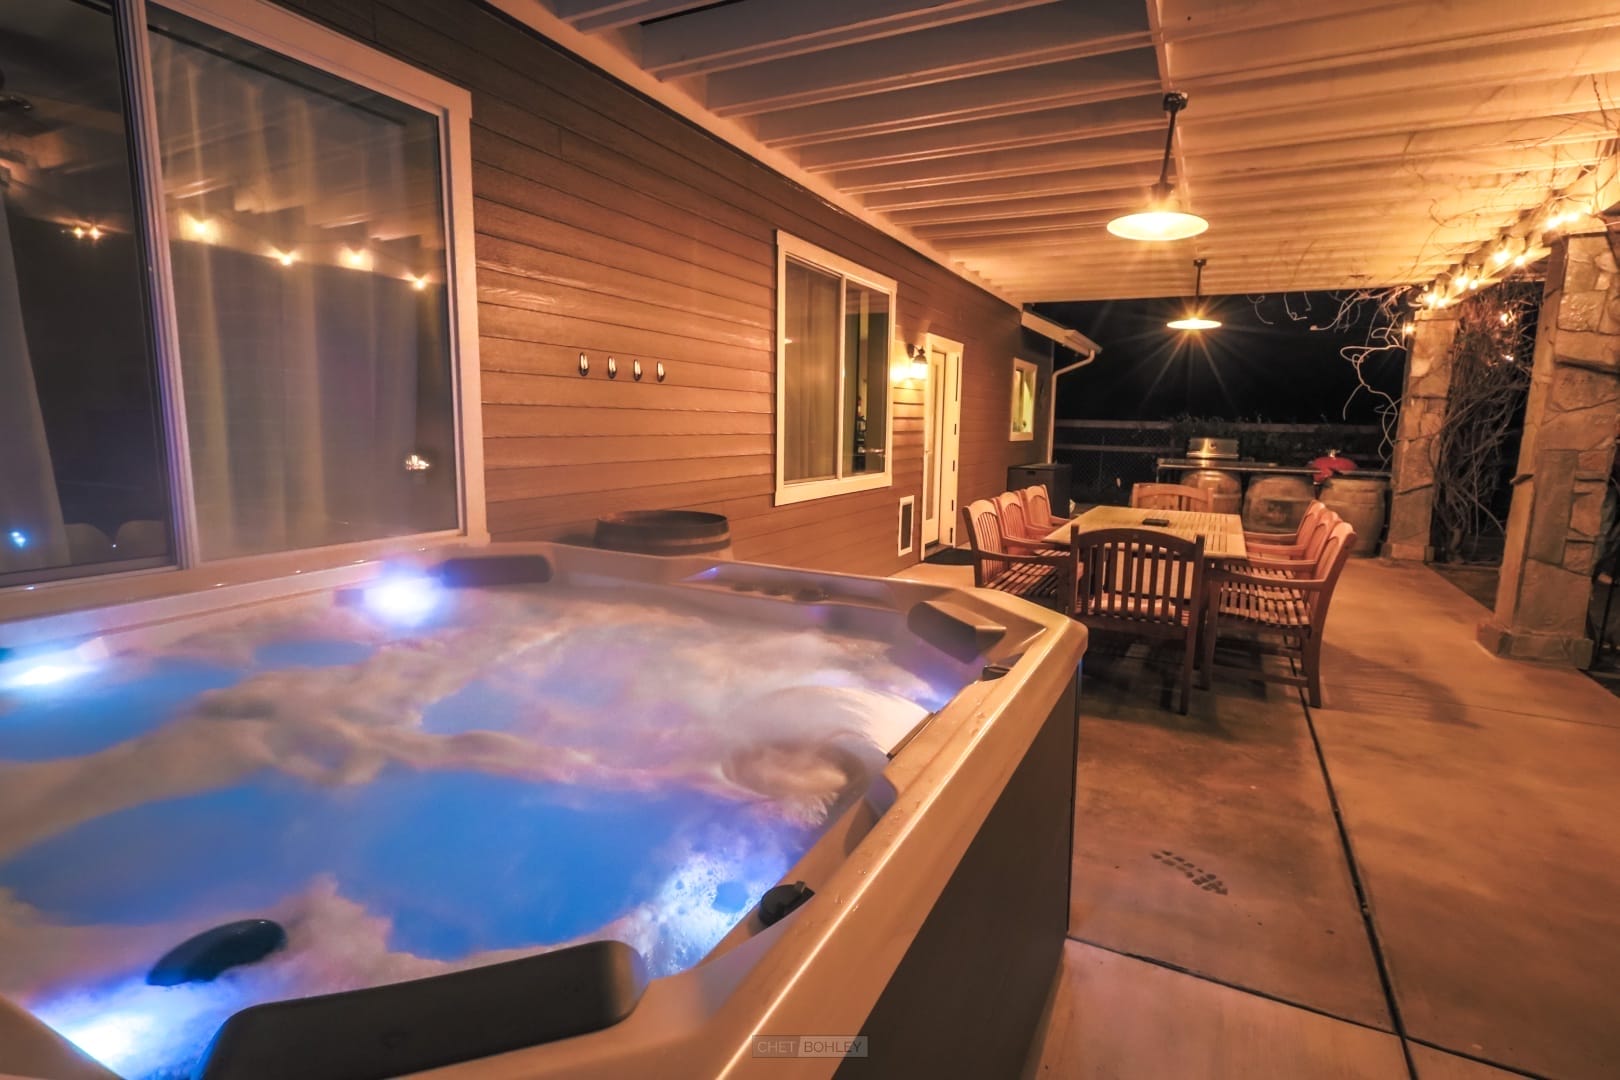 A centrally-located hot tub on a deck at night, perfect for your Atascadero vacation rental.